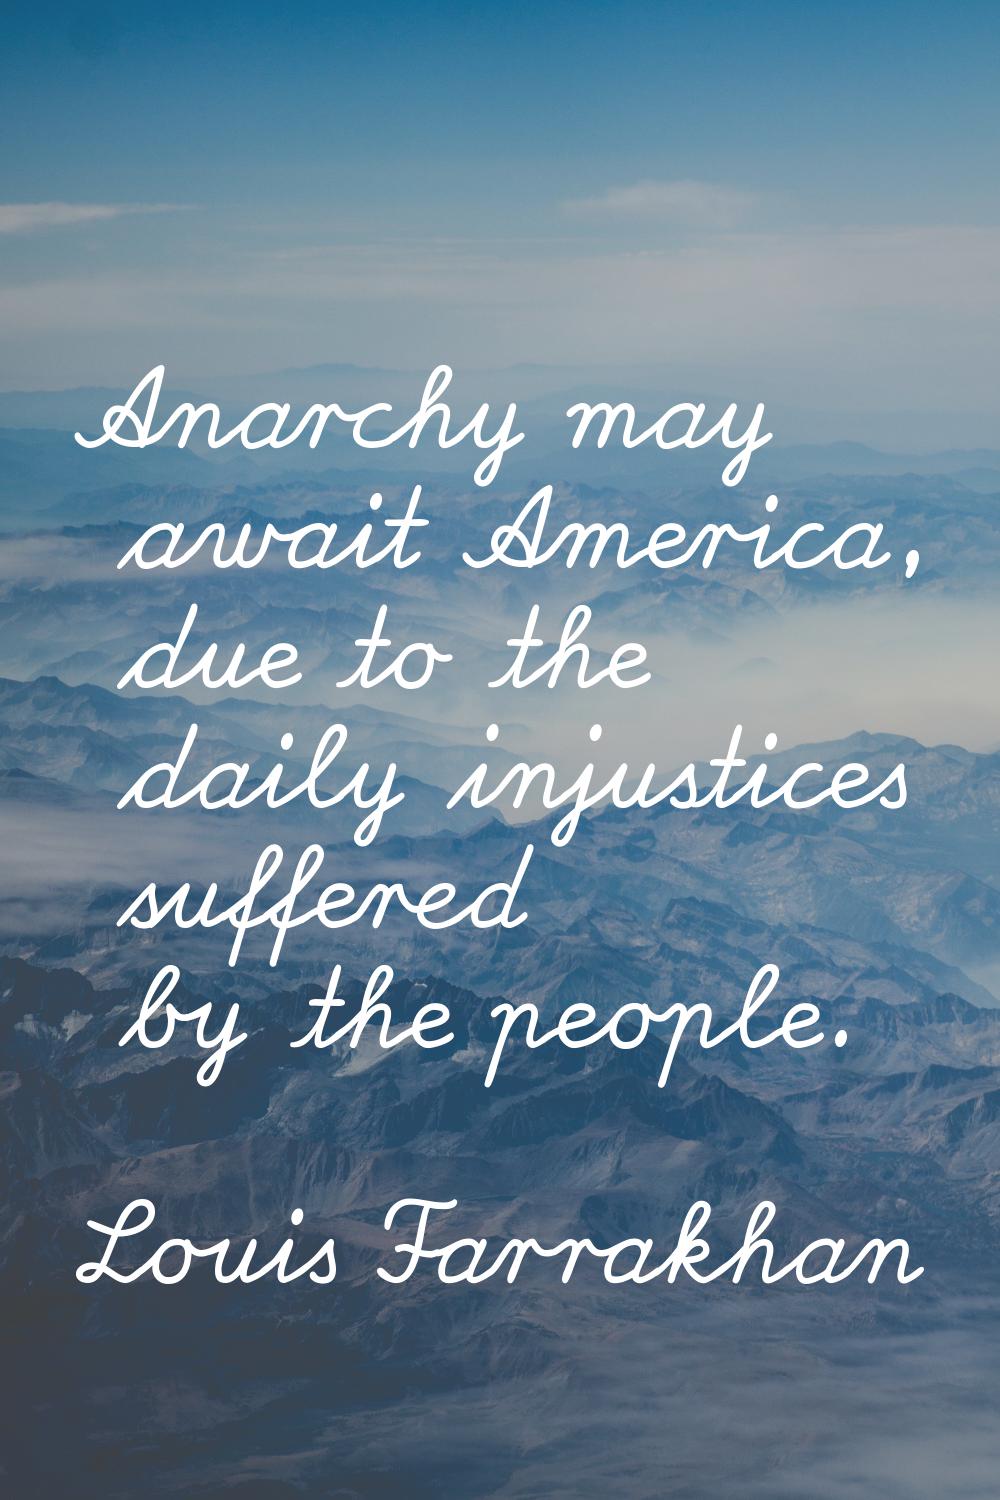 Anarchy may await America, due to the daily injustices suffered by the people.